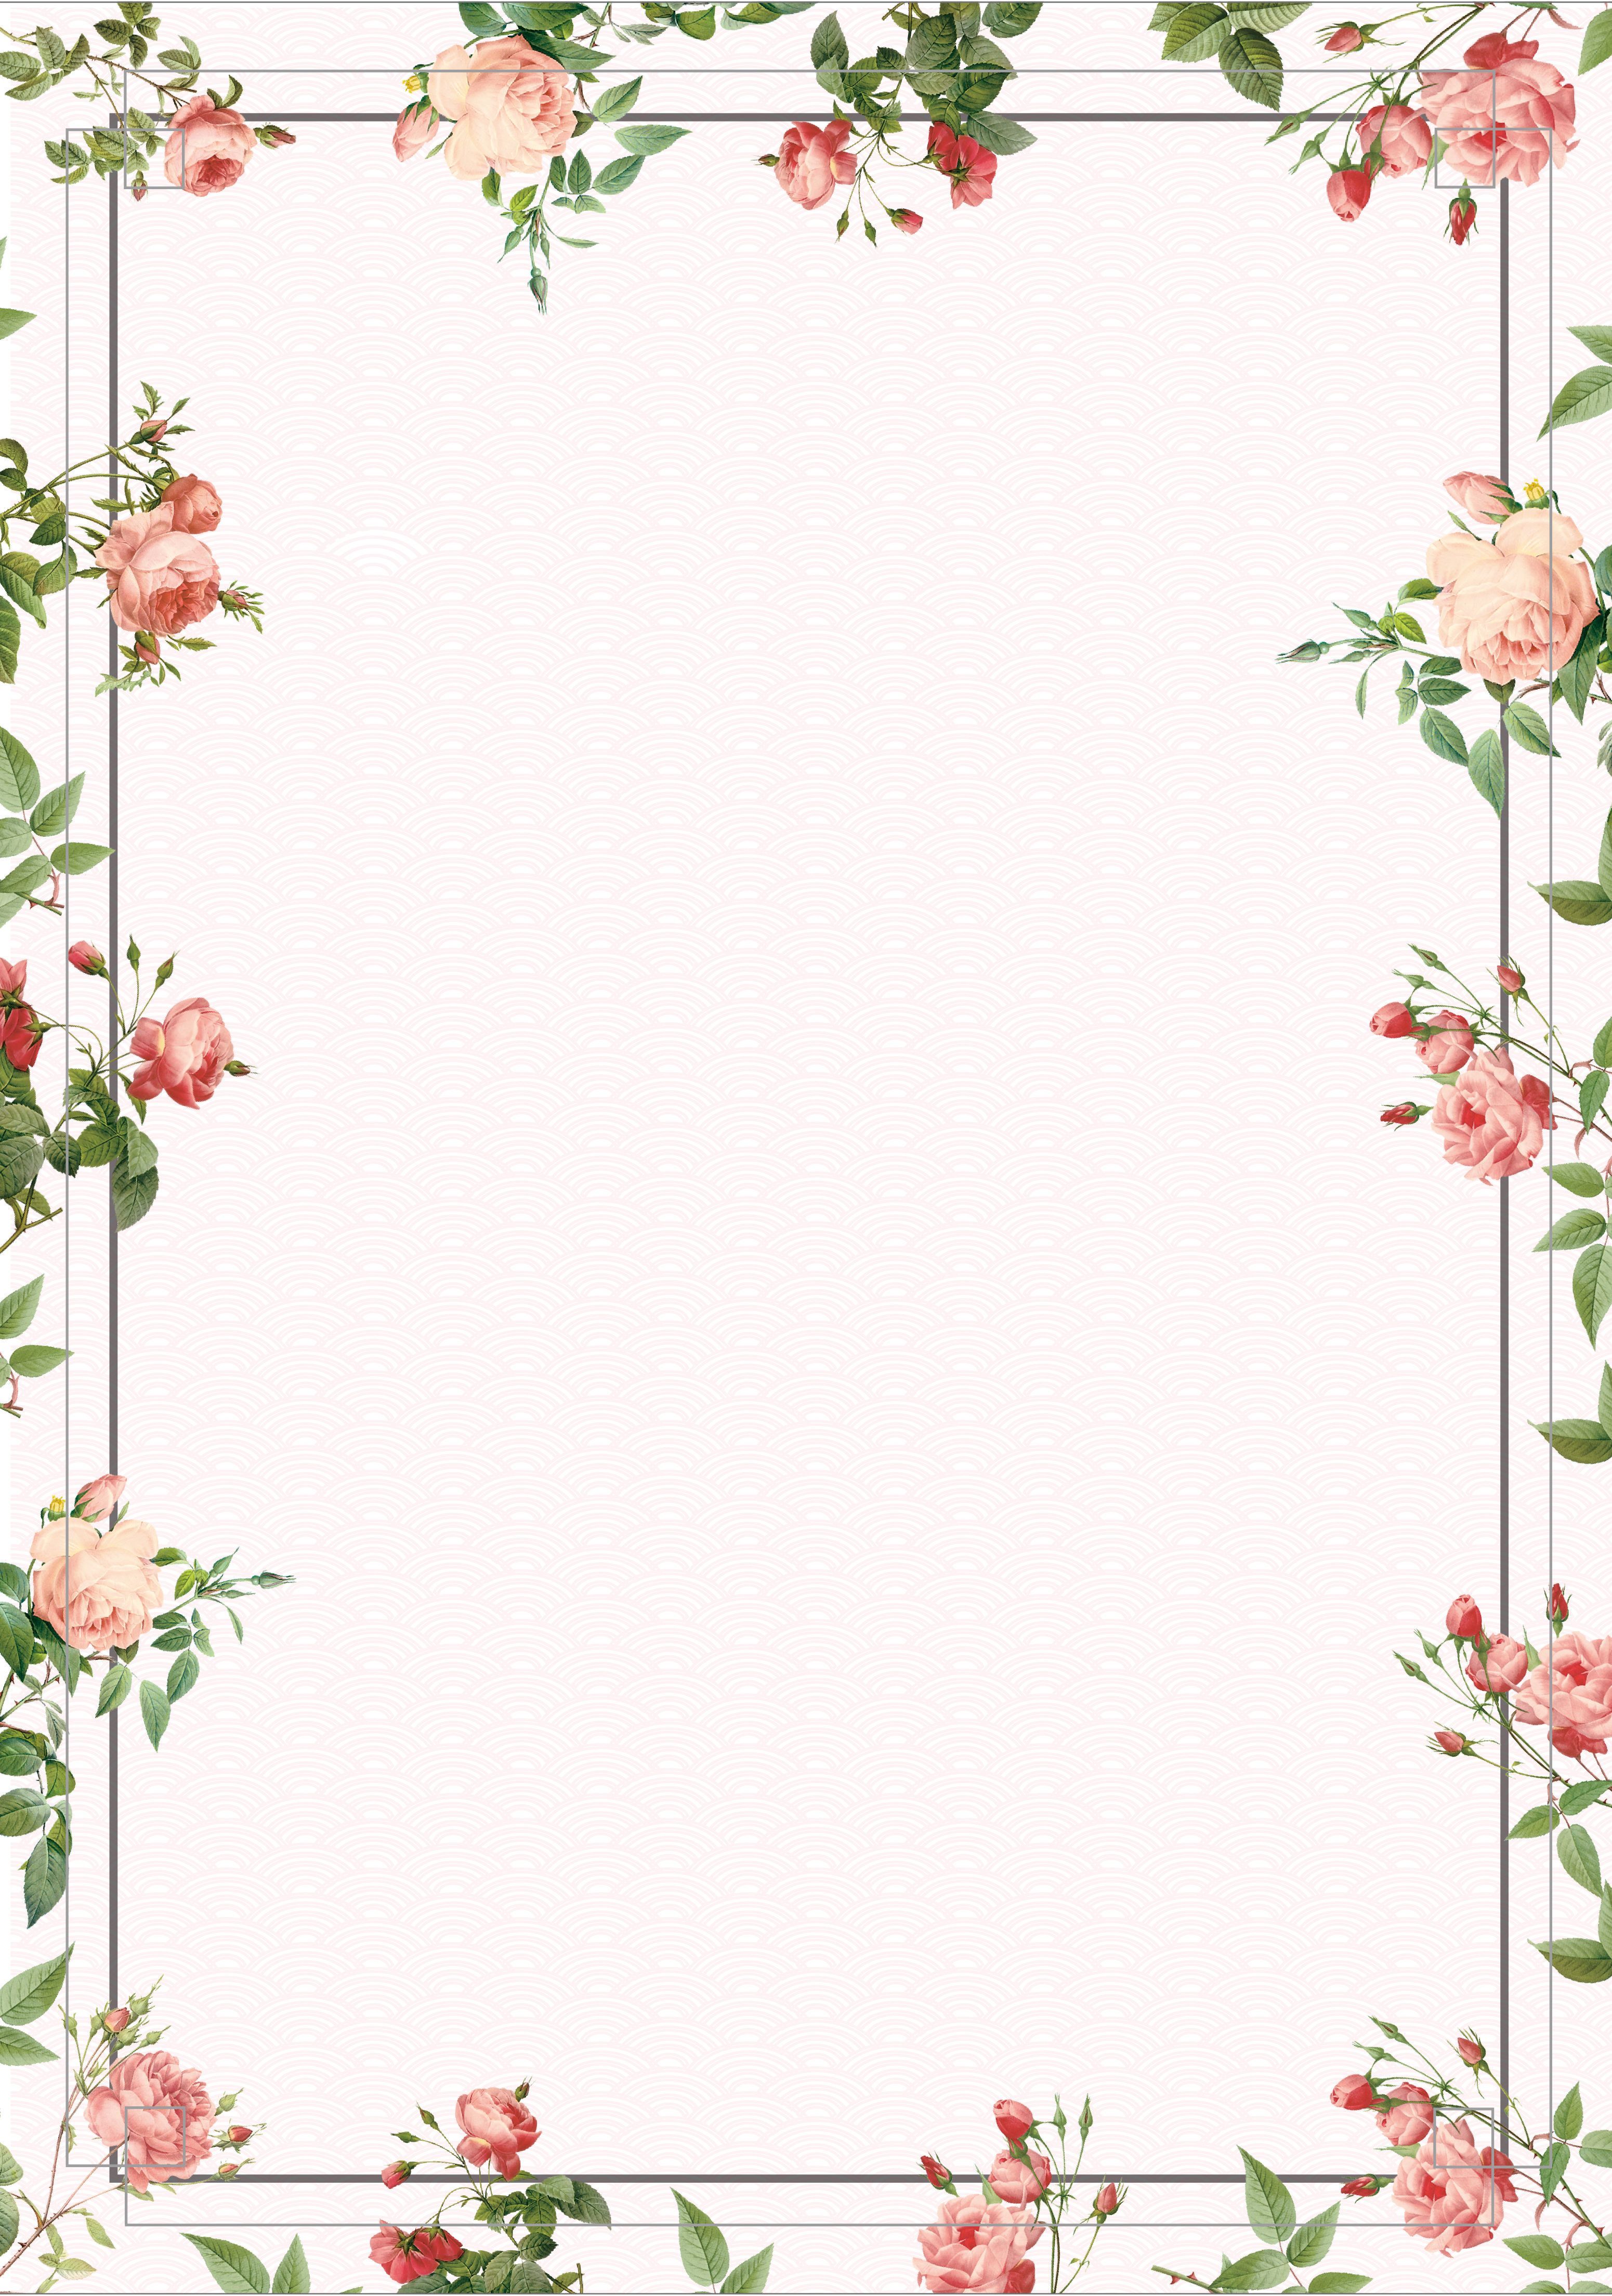 A floral frame with a white background - Border